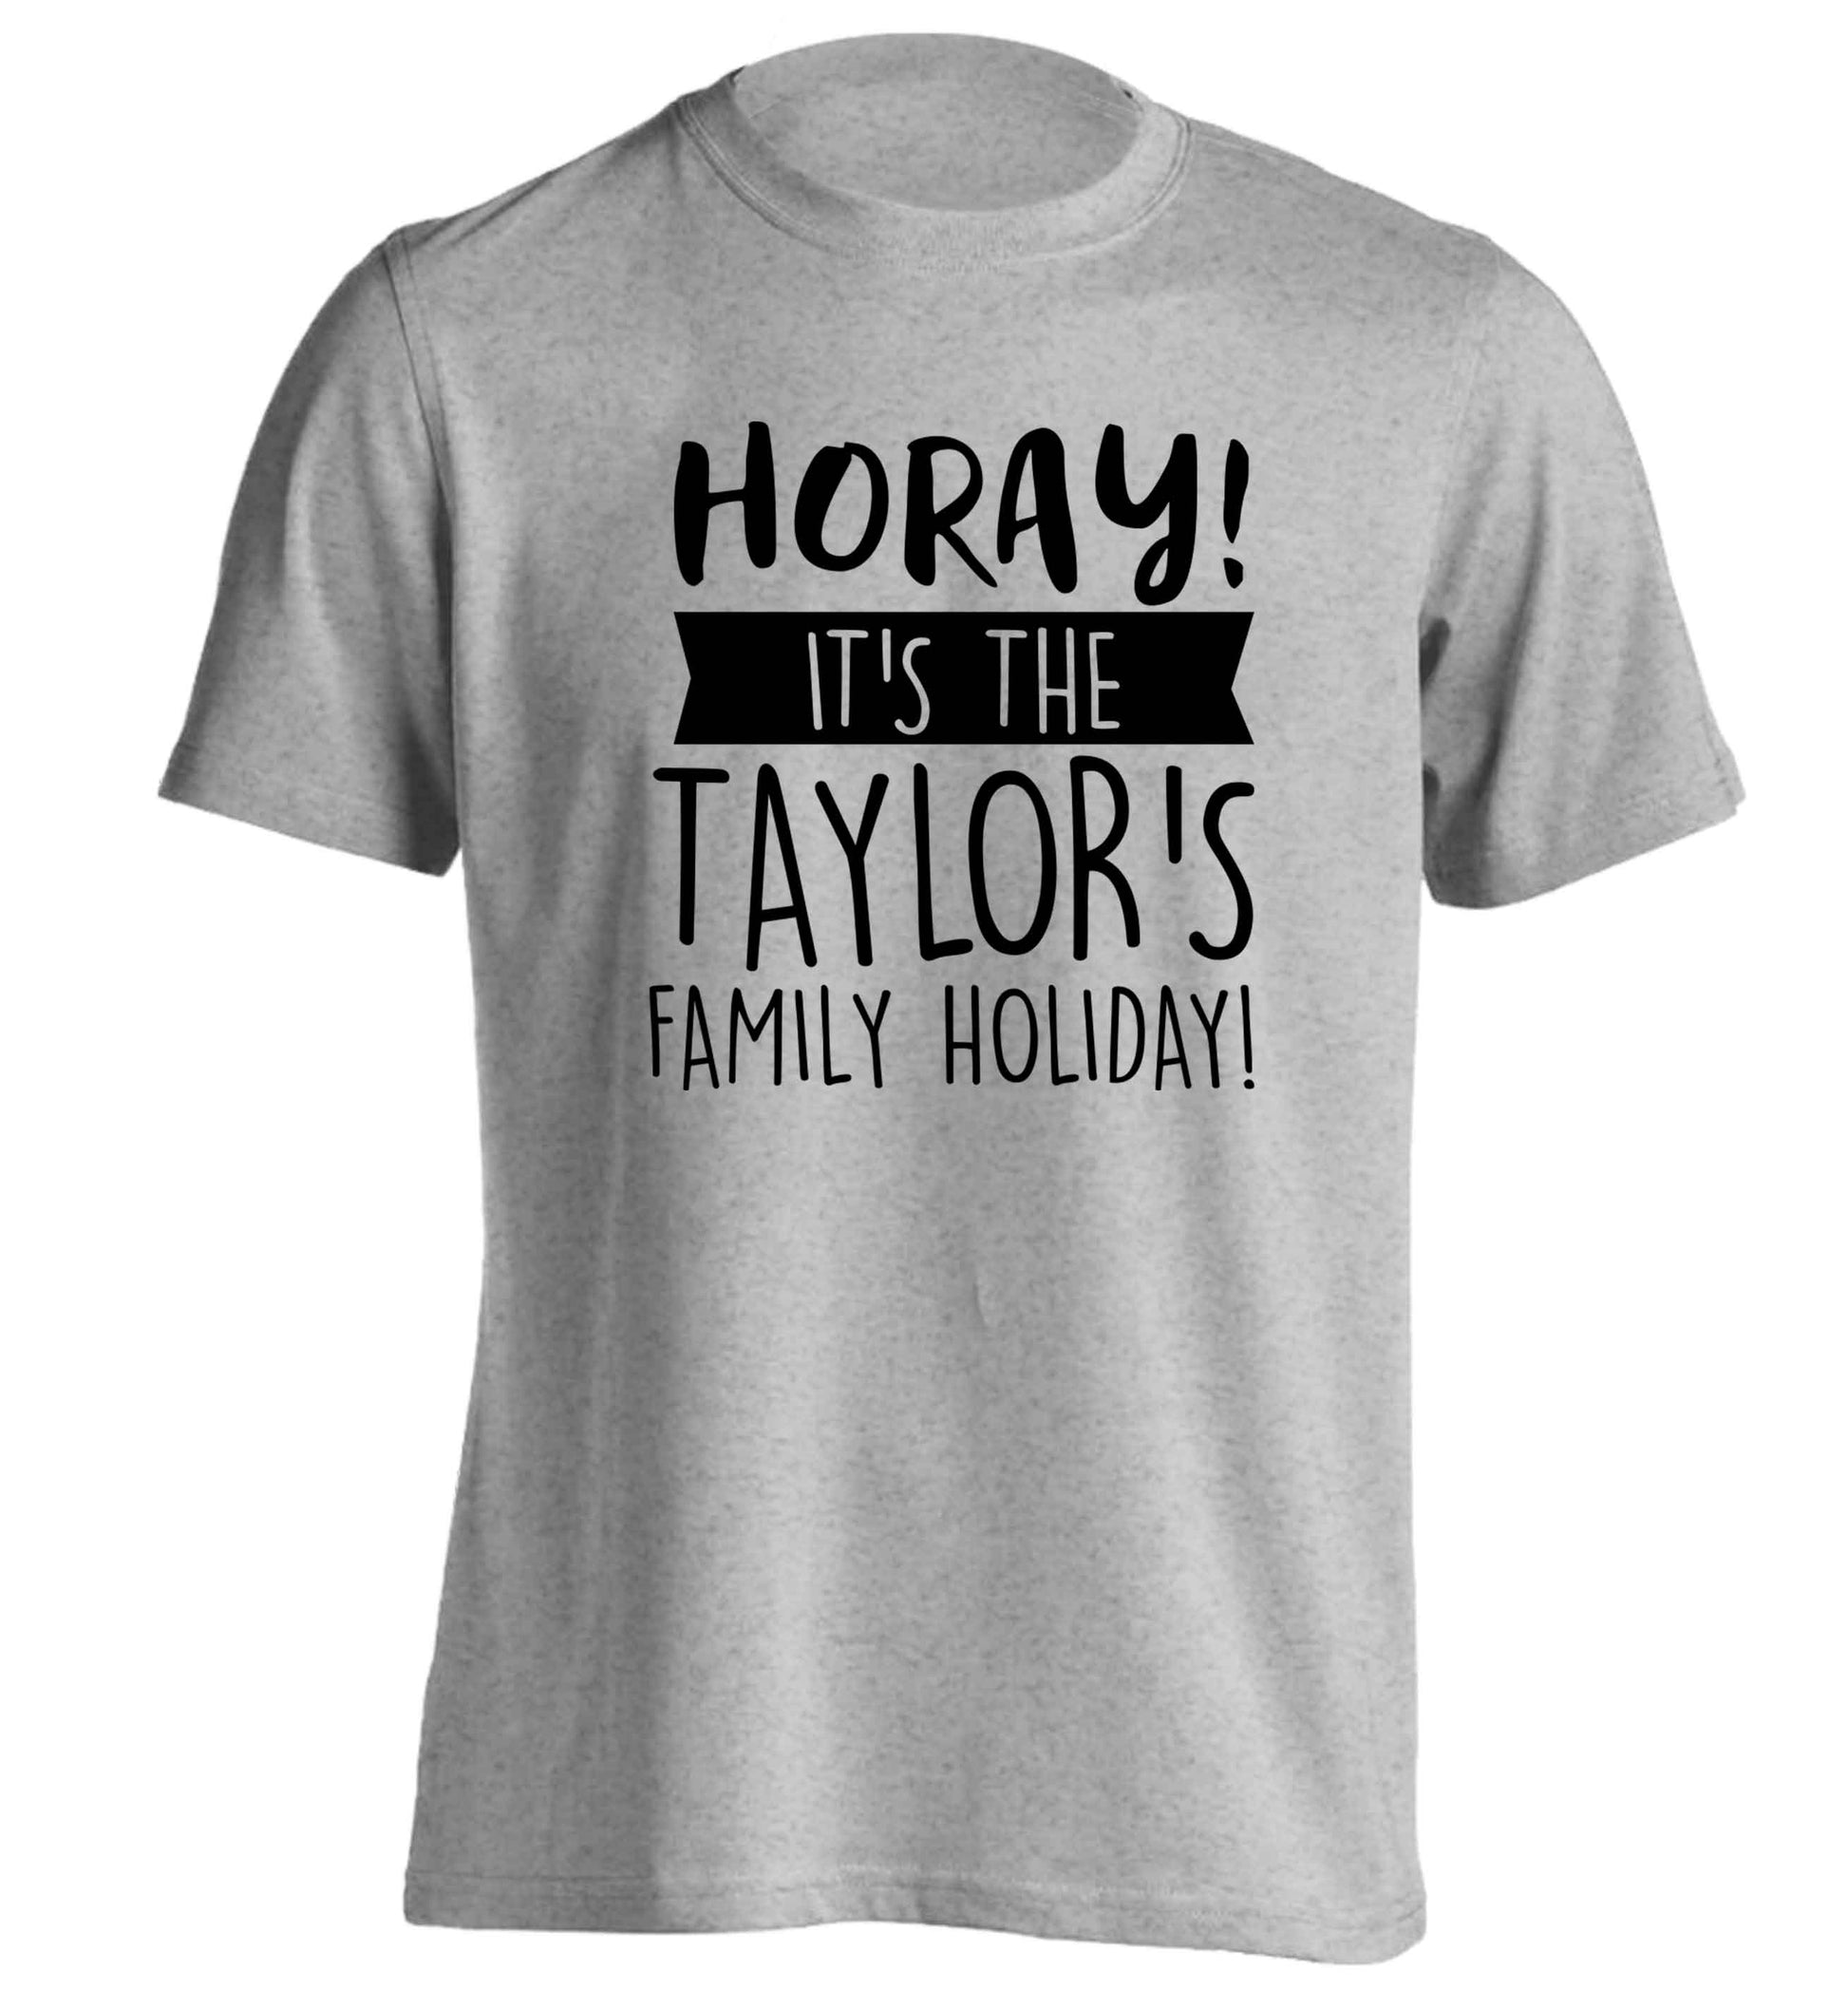 Horay it's the Taylor's family holiday! personalised item adults unisex grey Tshirt 2XL